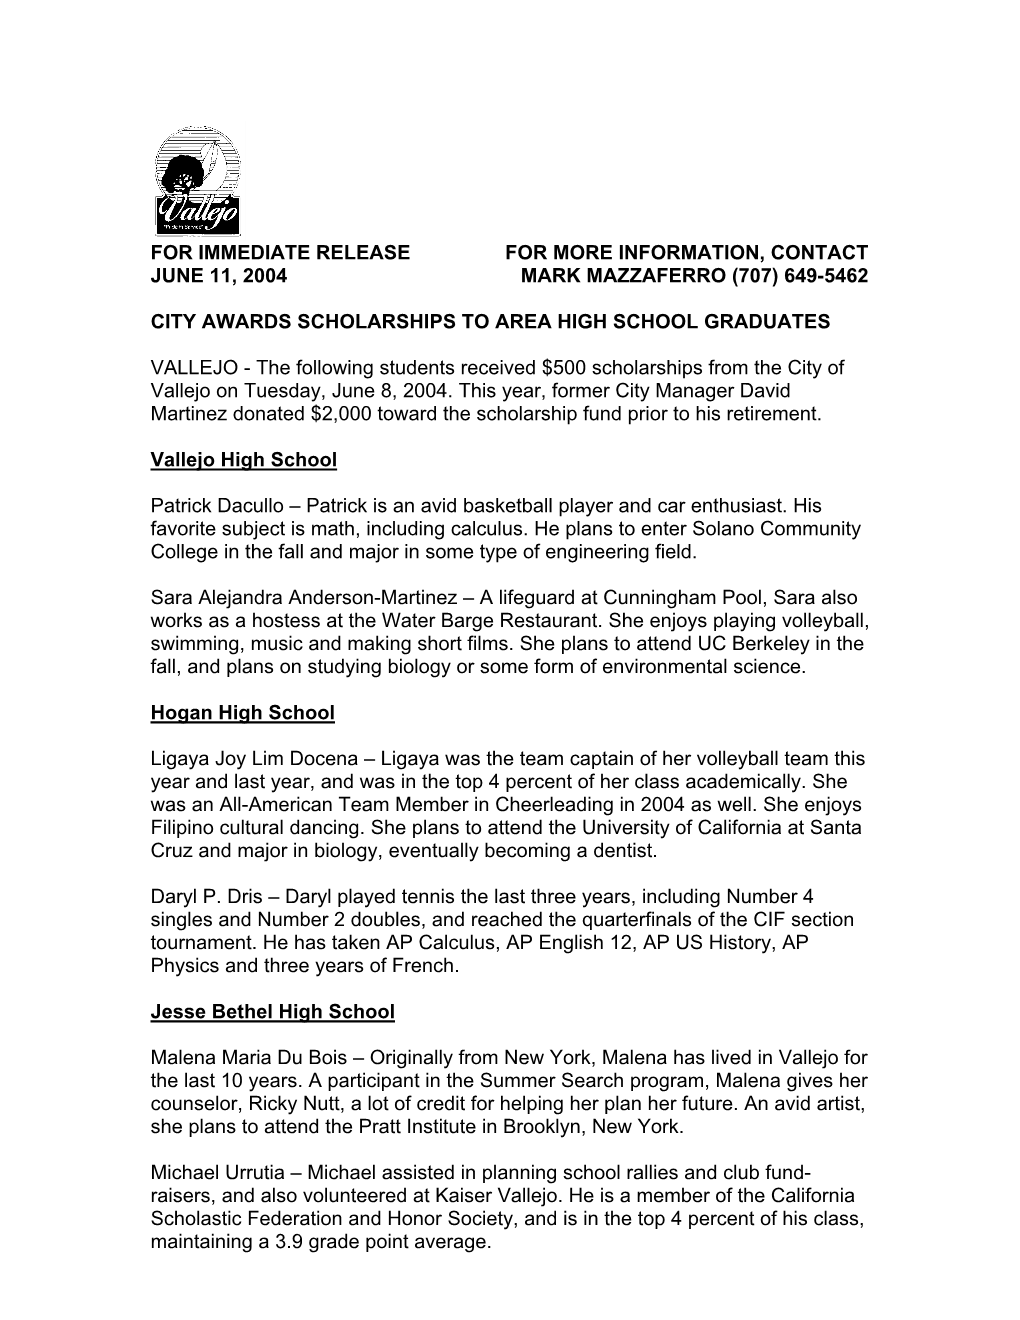 For Immediate Release for More Information, Contact June 11, 2004 Mark Mazzaferro (707) 649-5462 City Awards Scholarship